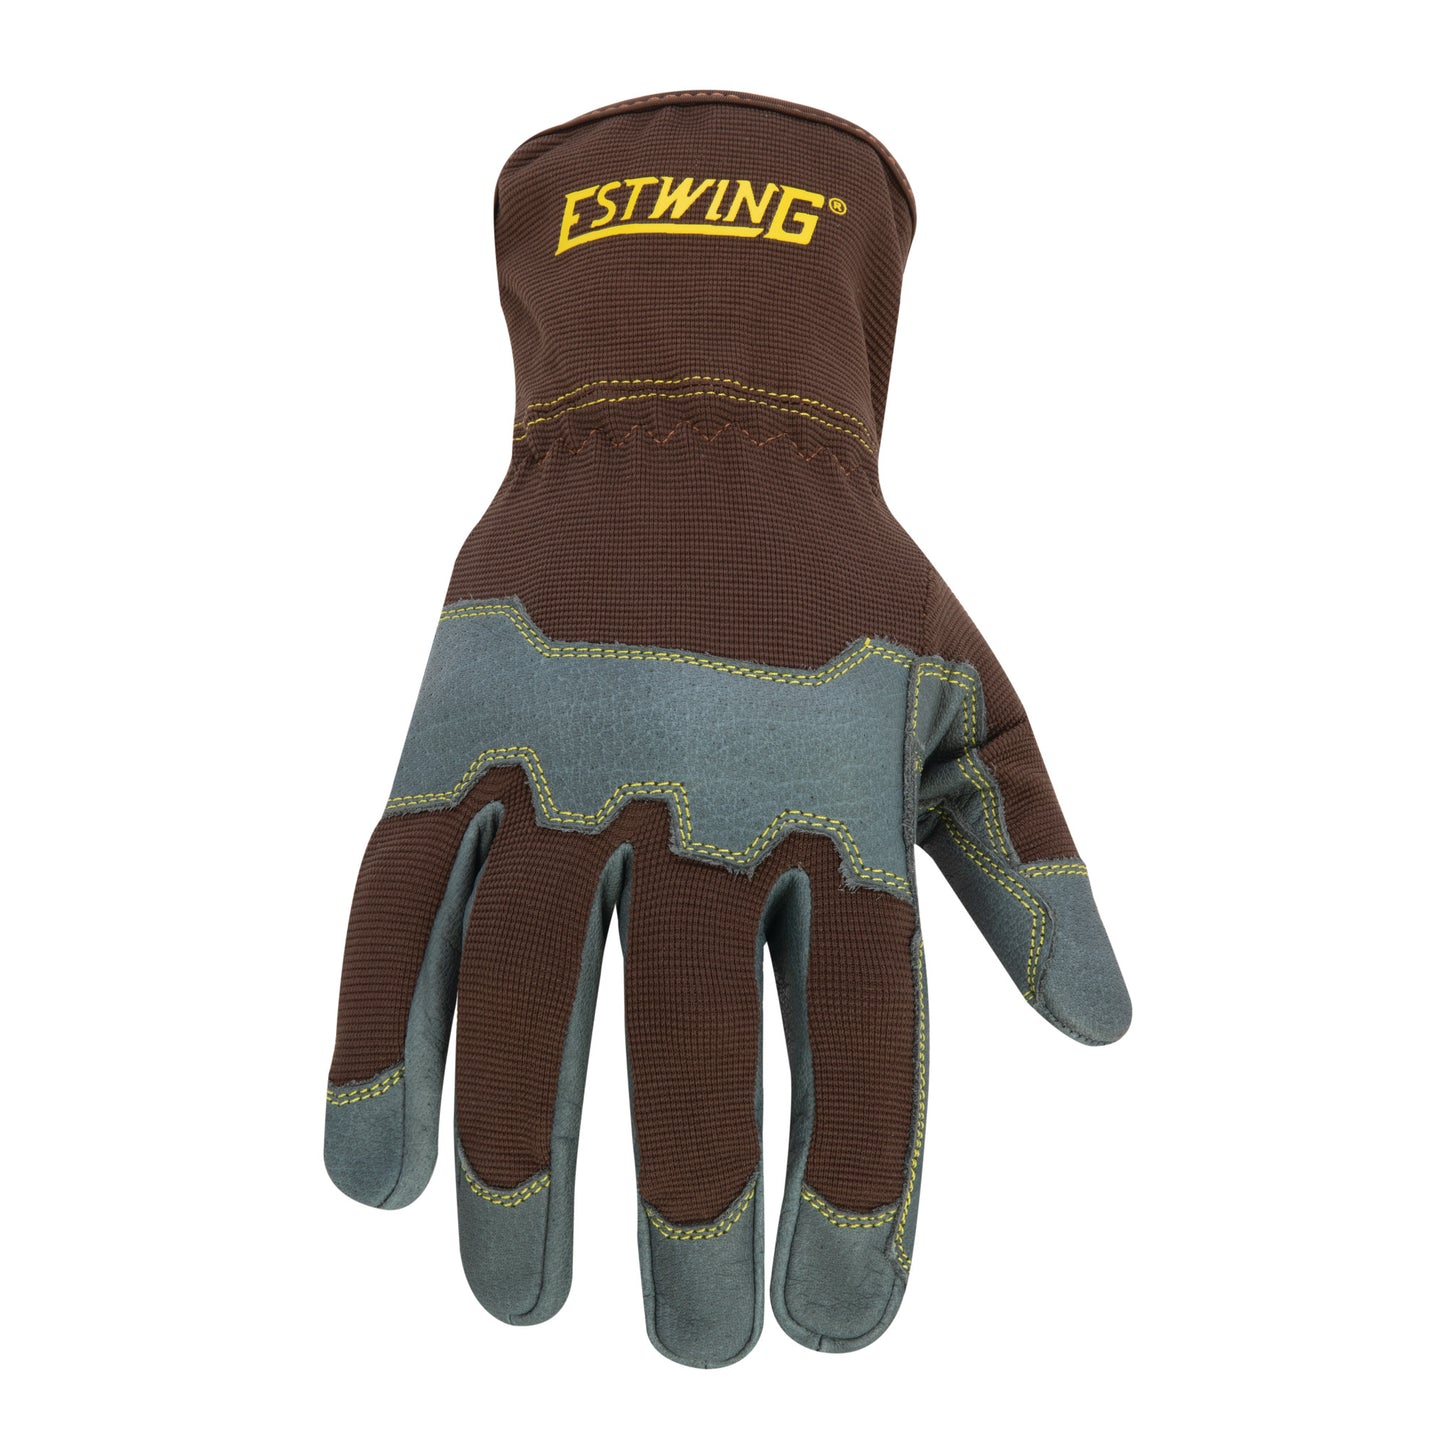 Reinforced Knuckle Leather Palm Work Glove with Elastic Sewn Extended Cuff